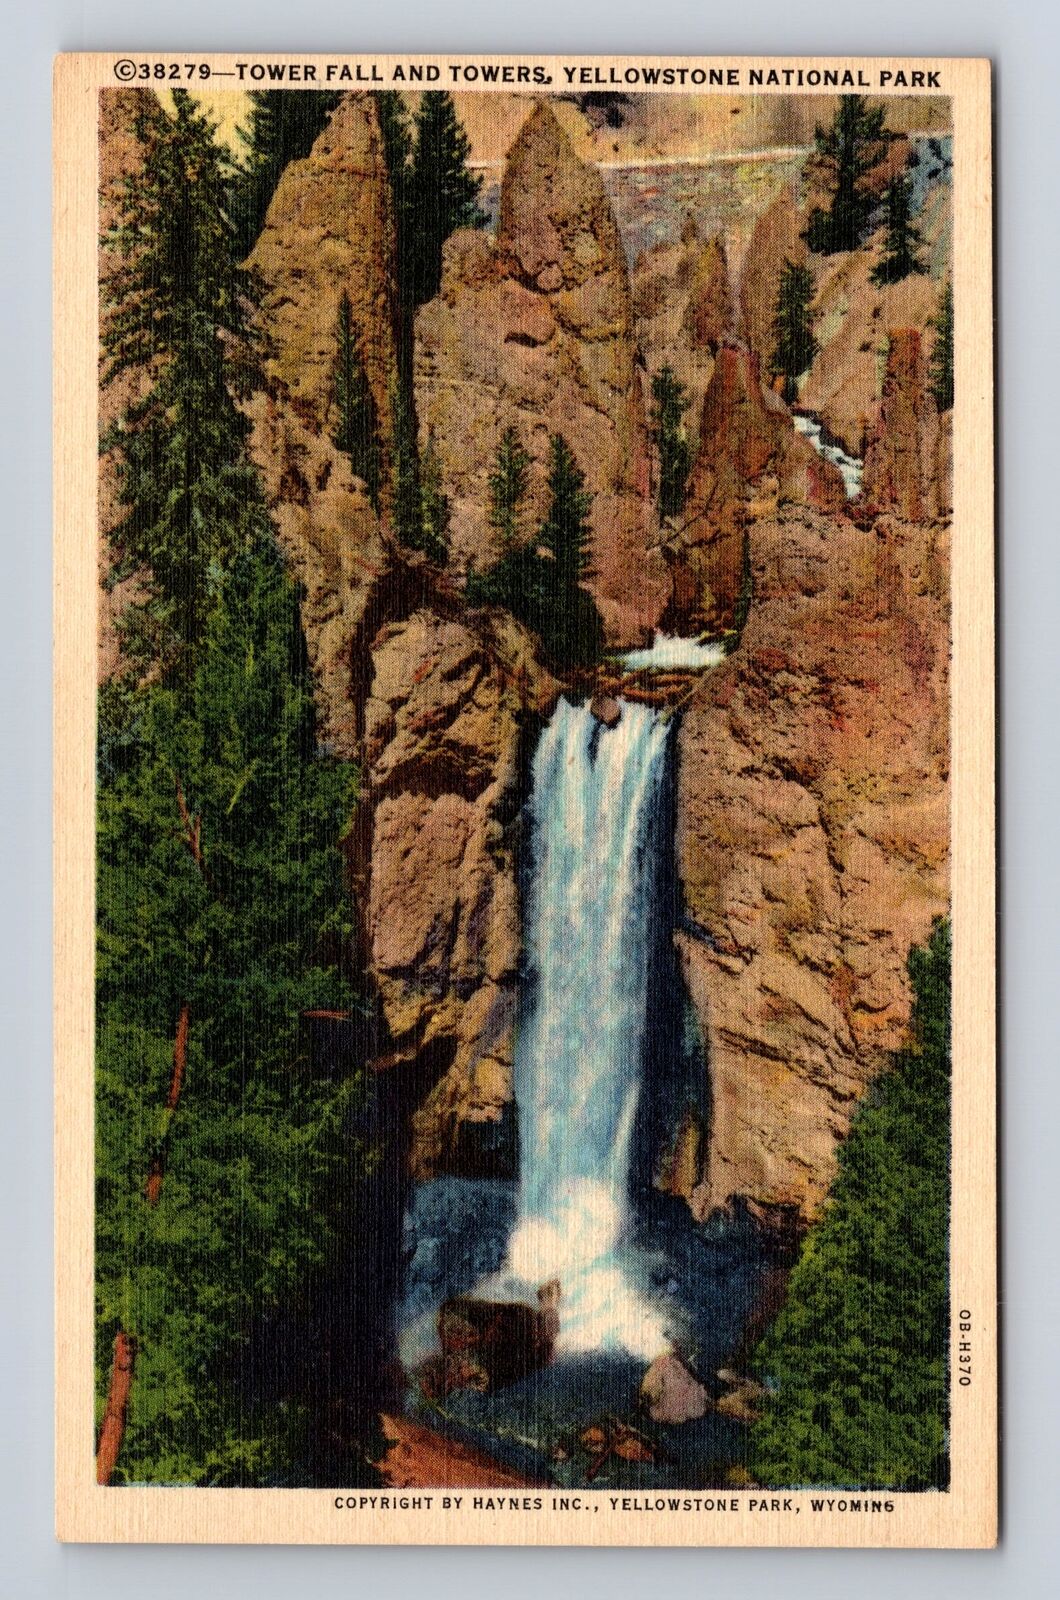 Yellowstone National Park, Tower Falls And Towers Series #38279 Vintage Postcard